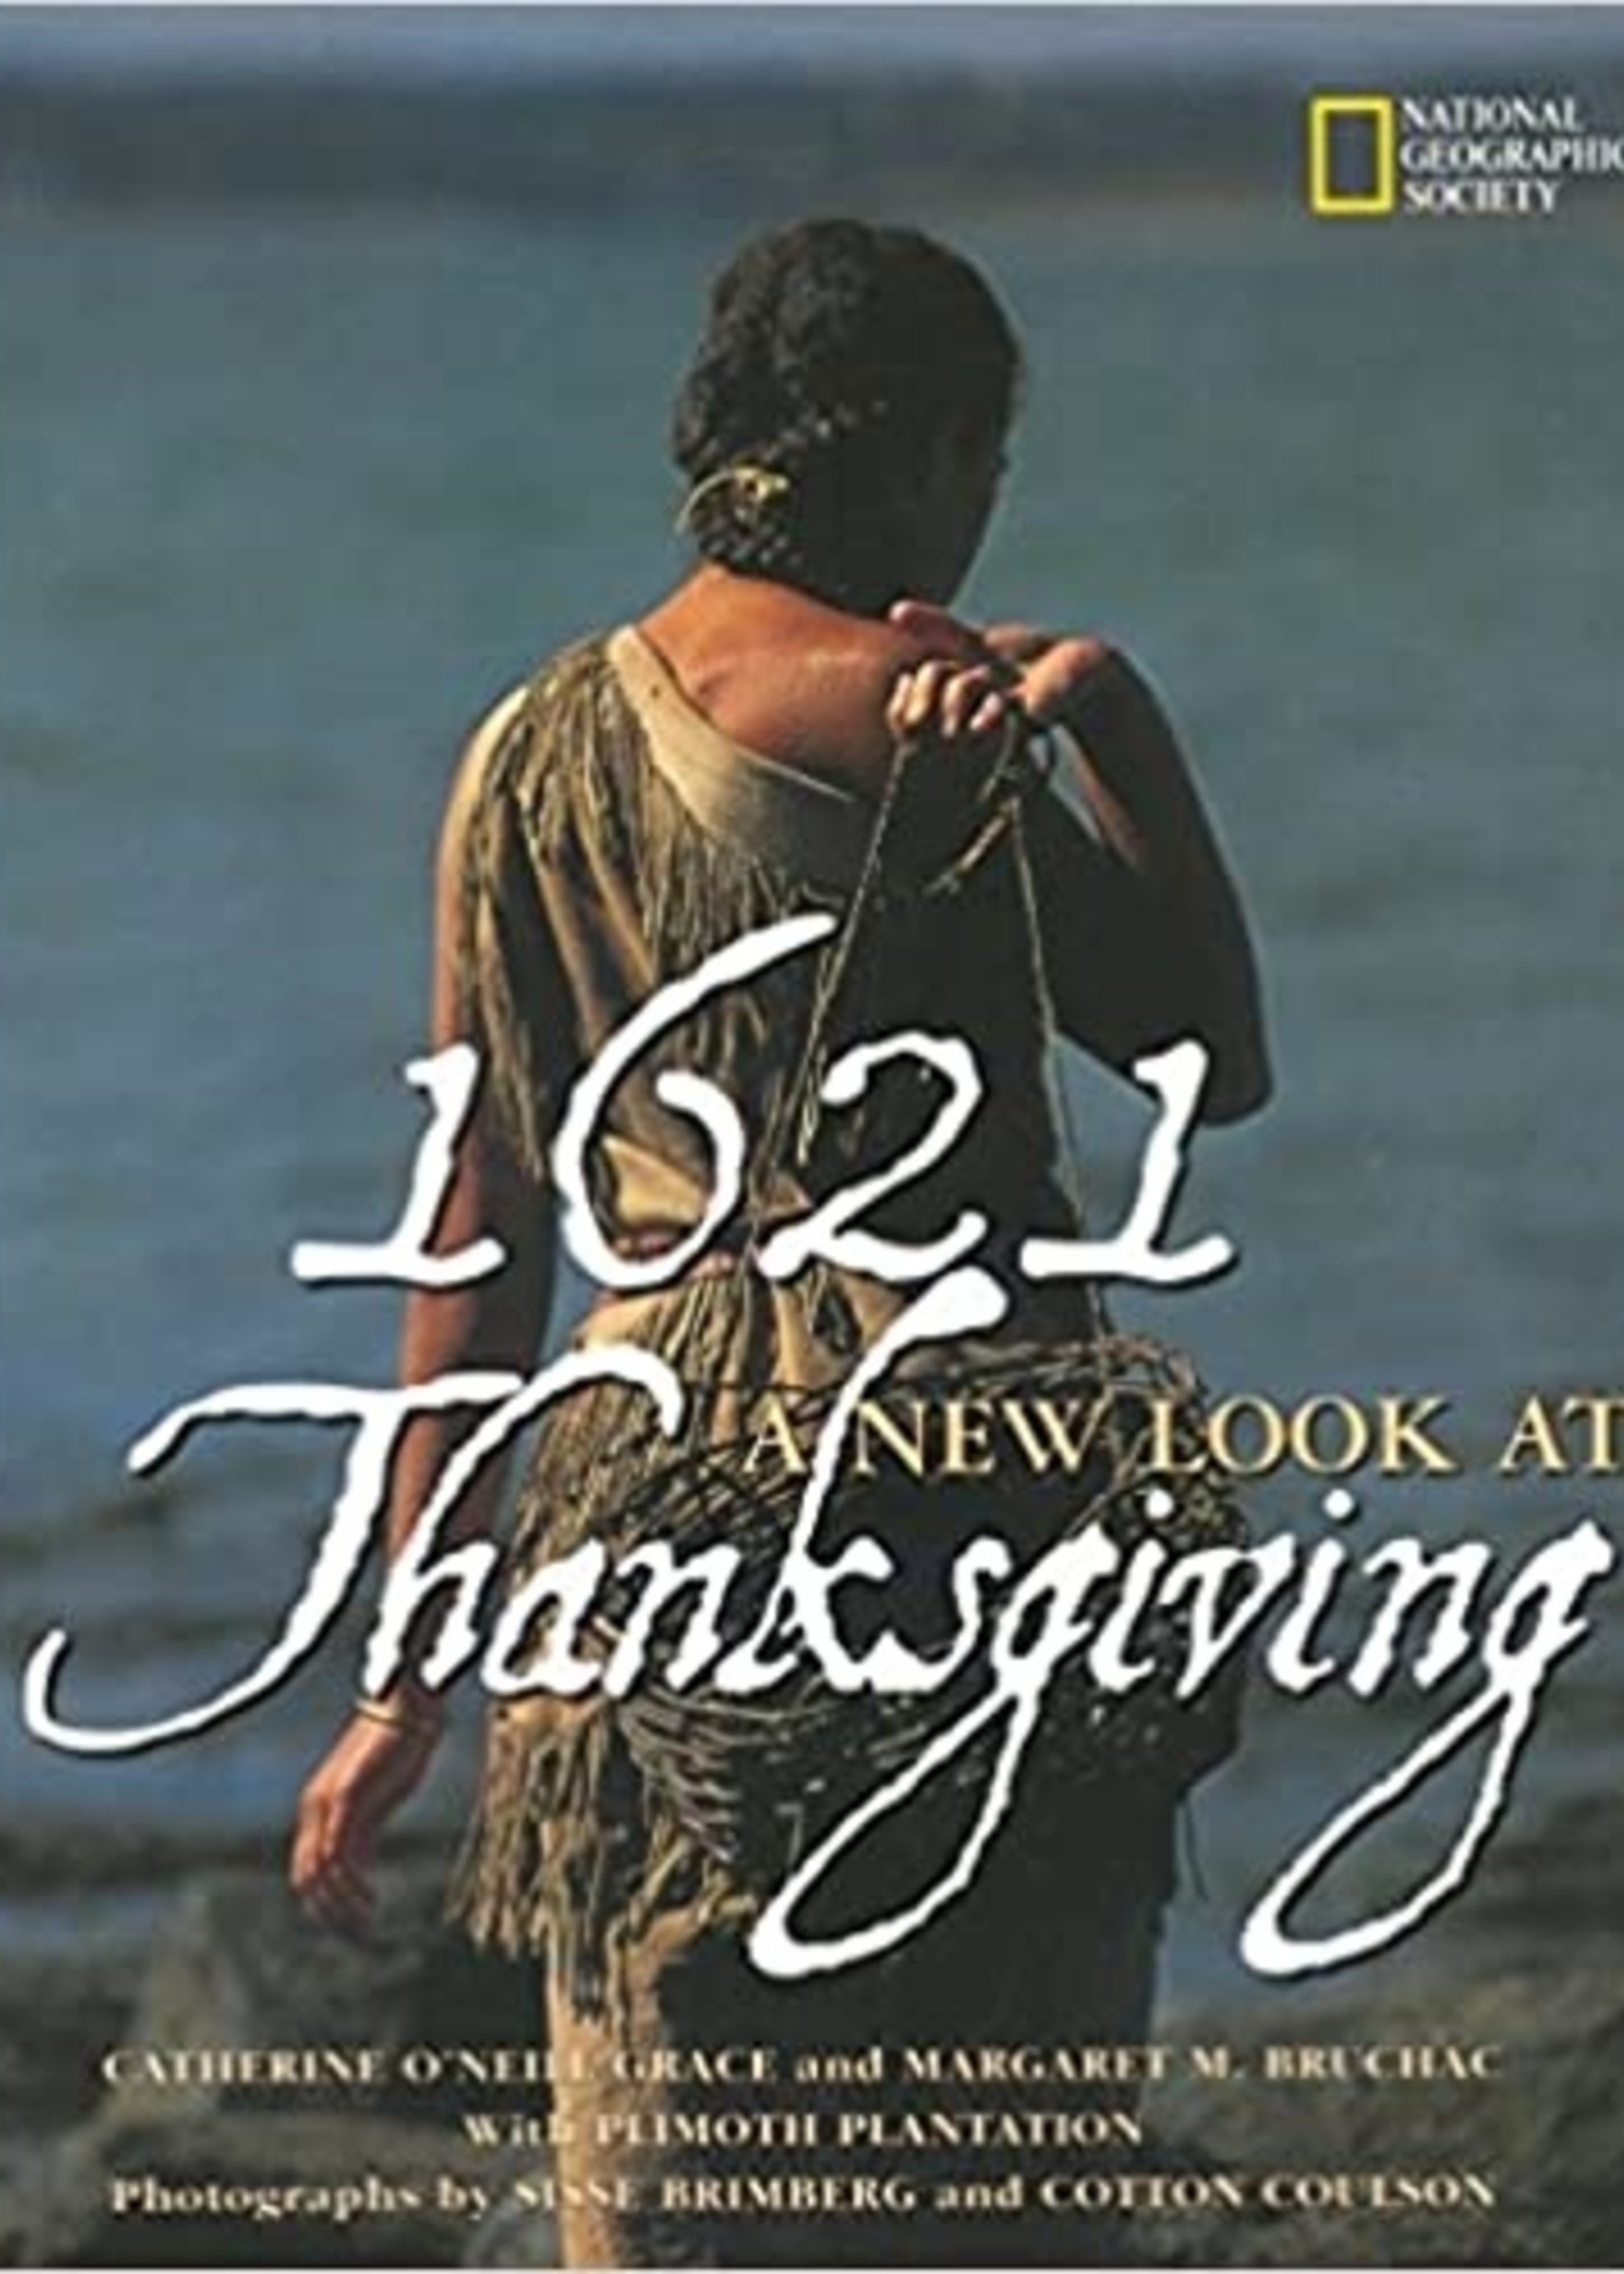 1621 New Look At Thanksgiving - Paperback